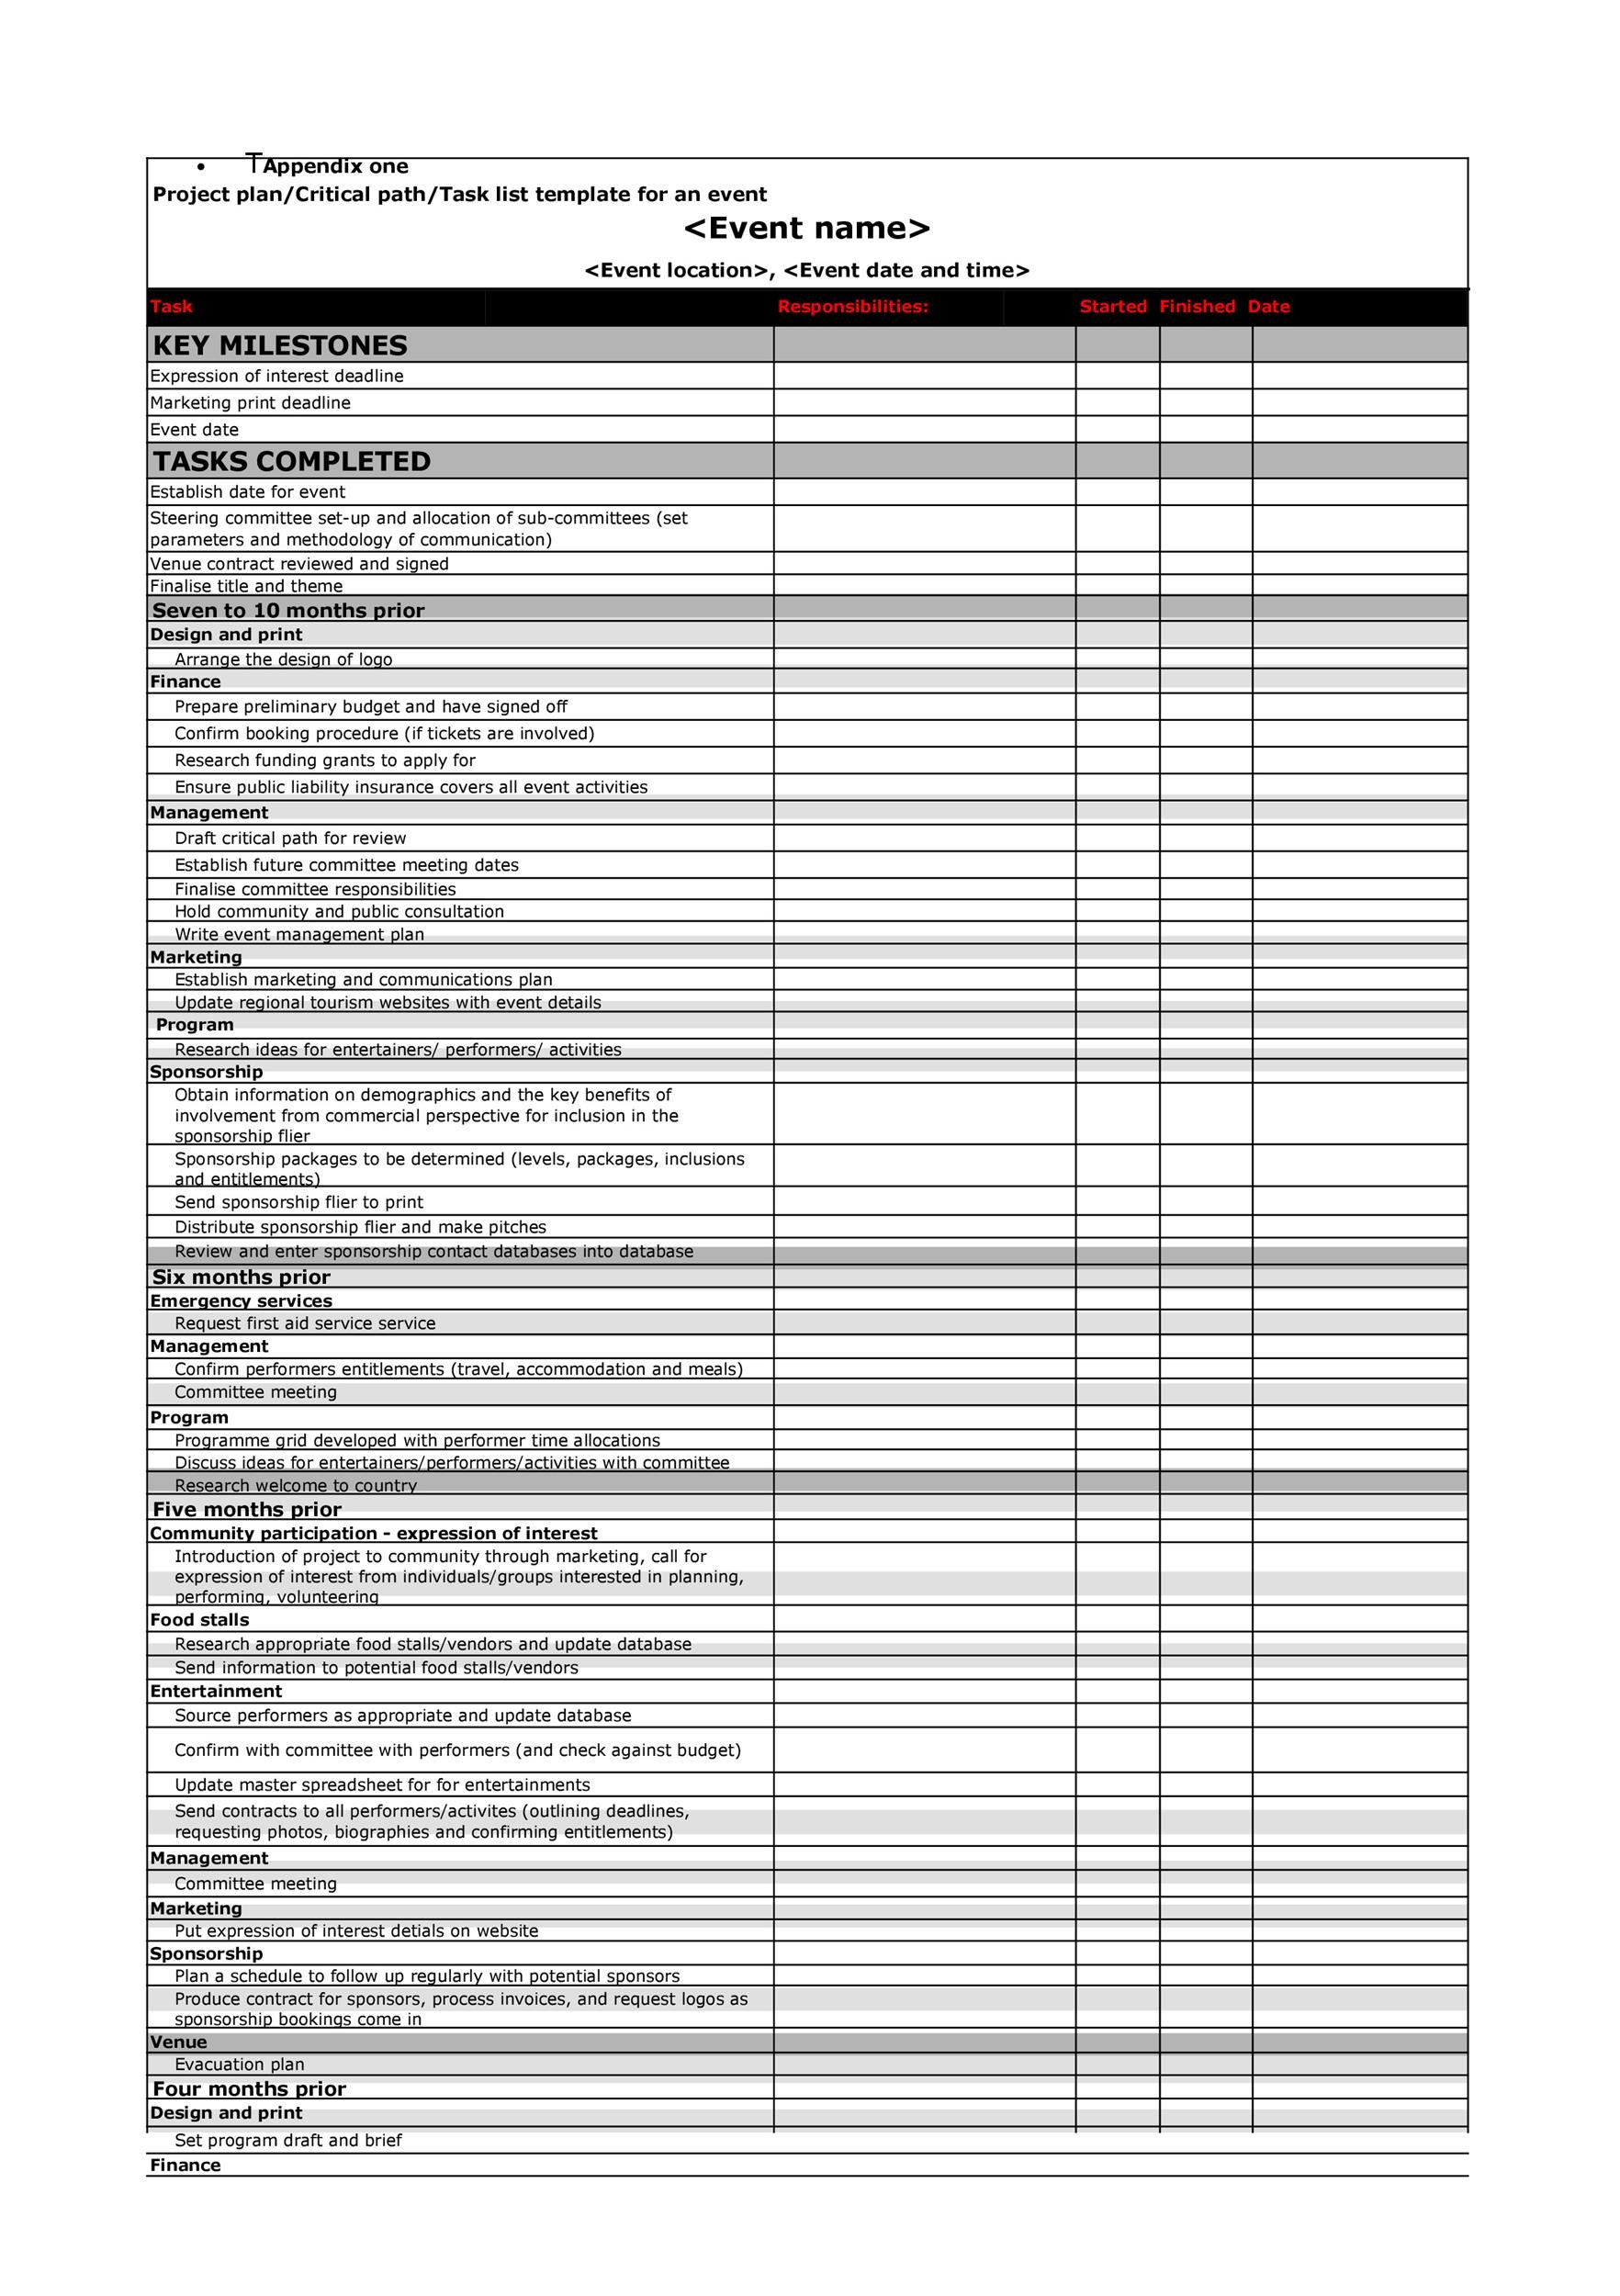 10 Professional Event Planning Checklist Templates ᐅ TemplateLab Within Event Management Checklist Template Inside Event Management Checklist Template